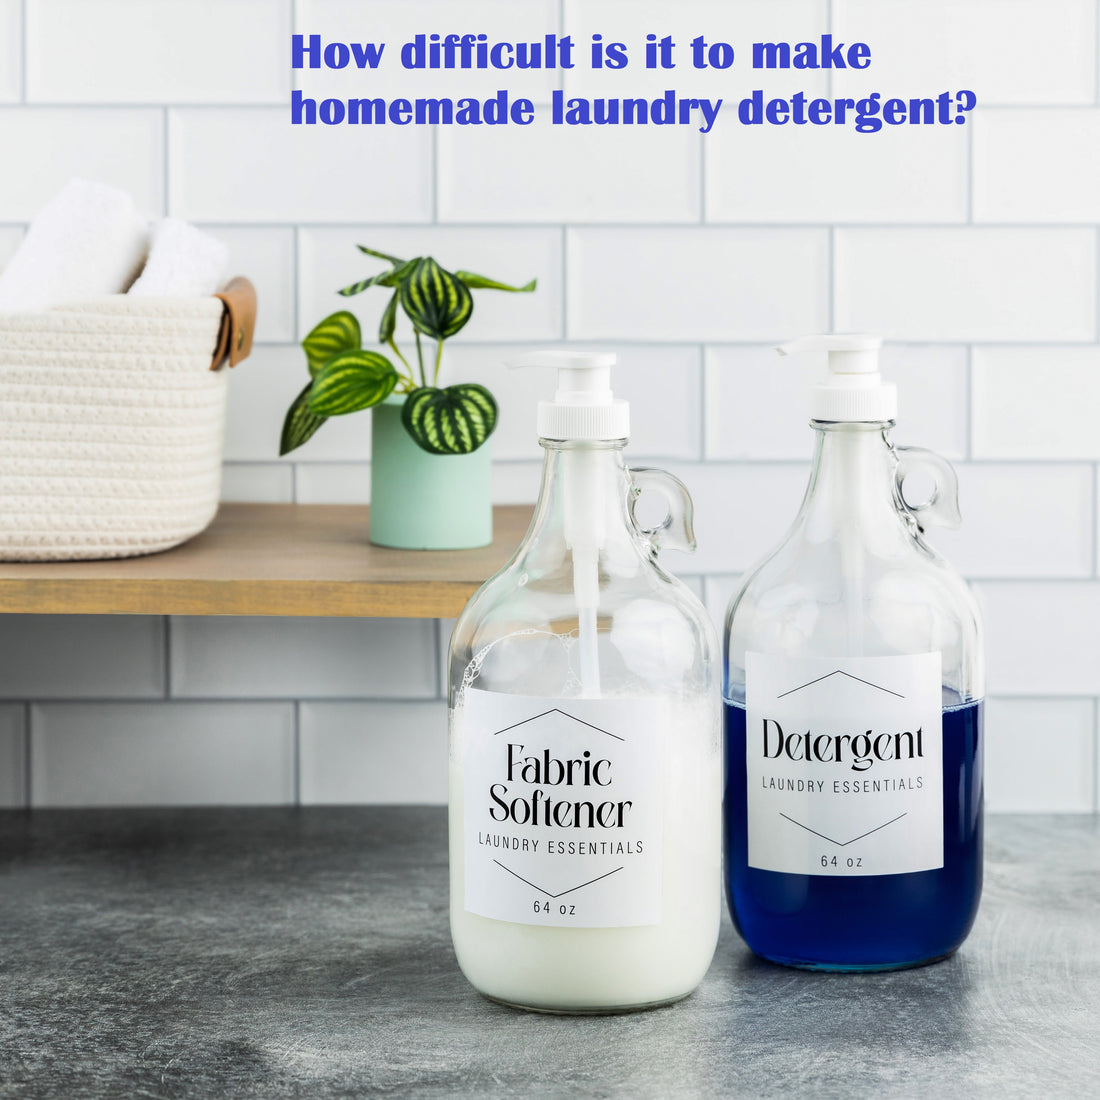 How difficult is it to make homemade laundry detergent?